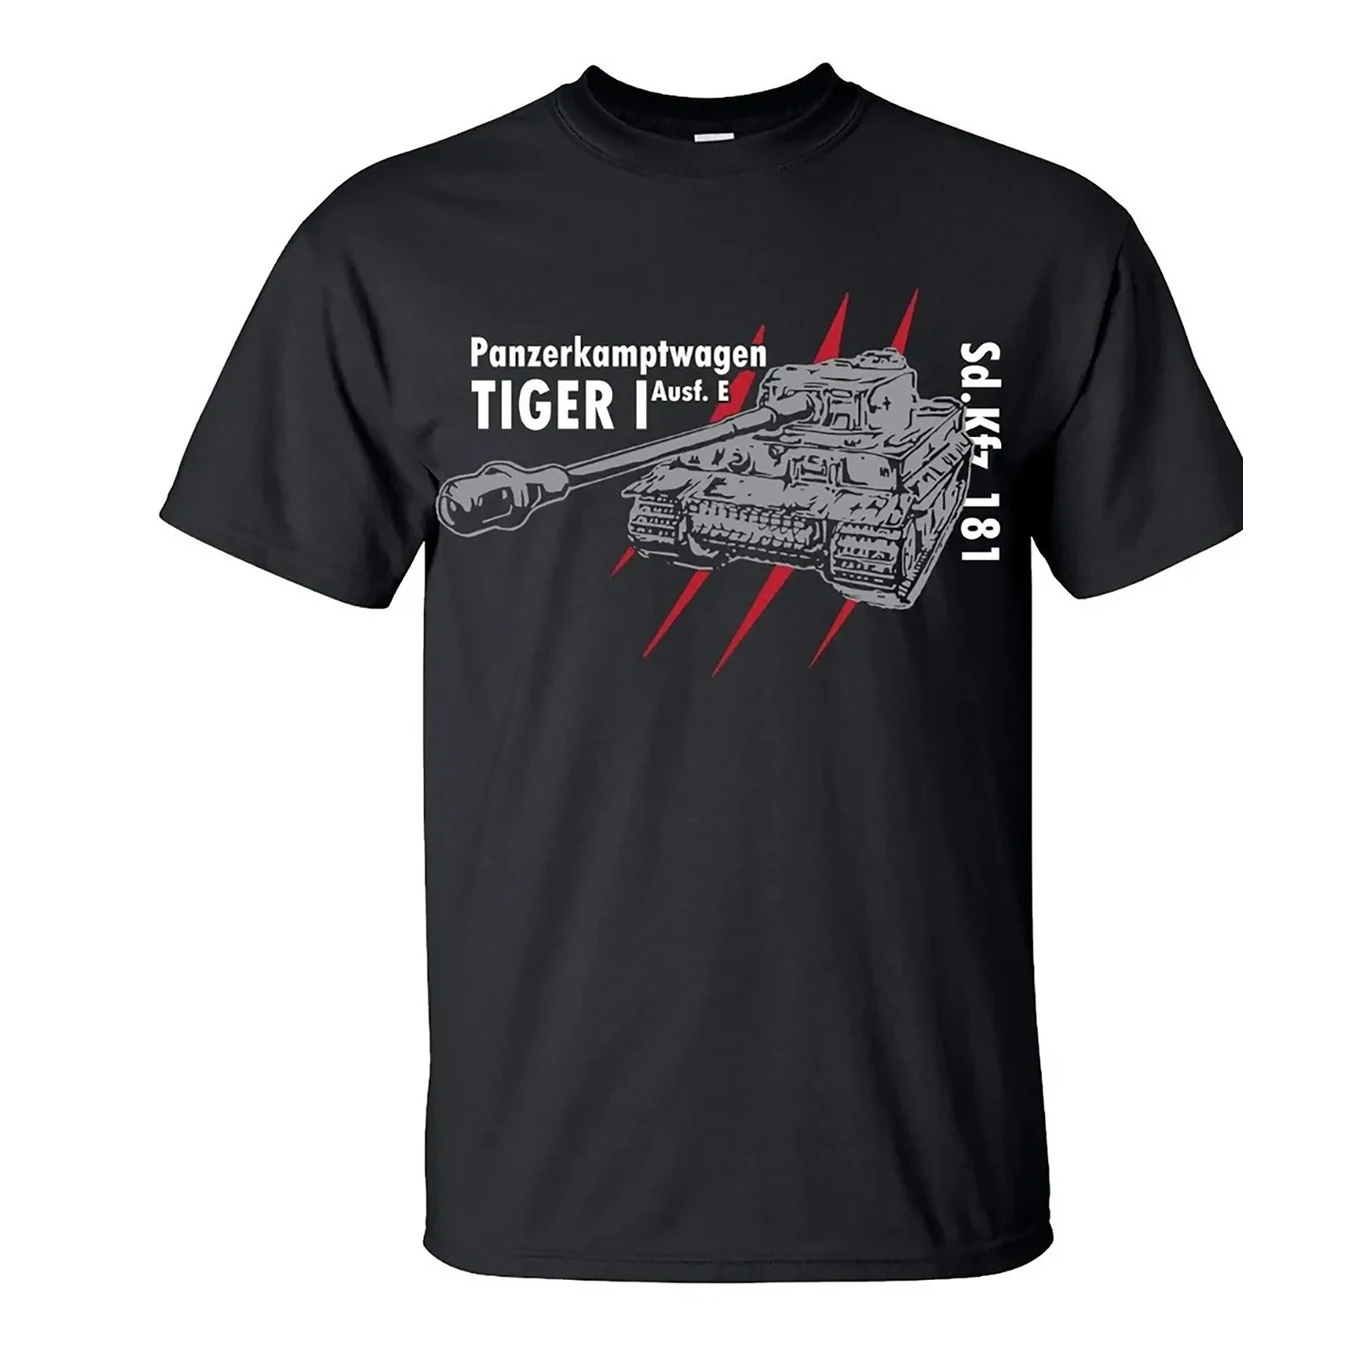 

Wehrmacht Panzer WWII German Tiger I Tank T Shirt. Short Sleeve 100% Cotton Casual T-shirts Loose Top Size S-3XL